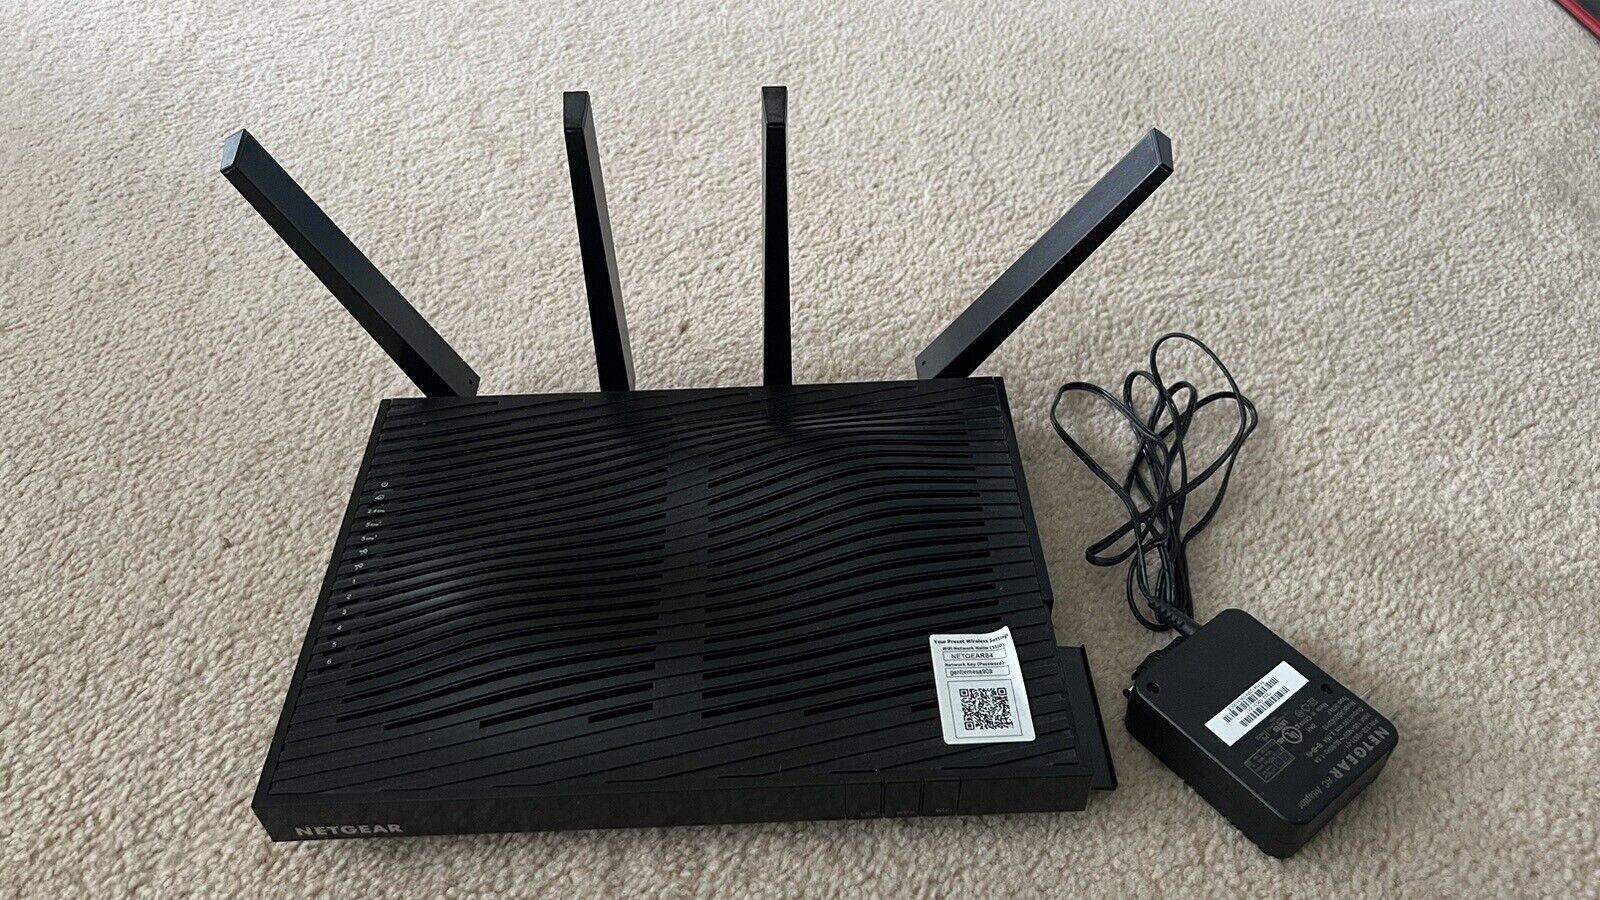 NETGEAR R8500 1000 Mbps 6 Port 2166 Mbps Wireless Router - Excellent condition